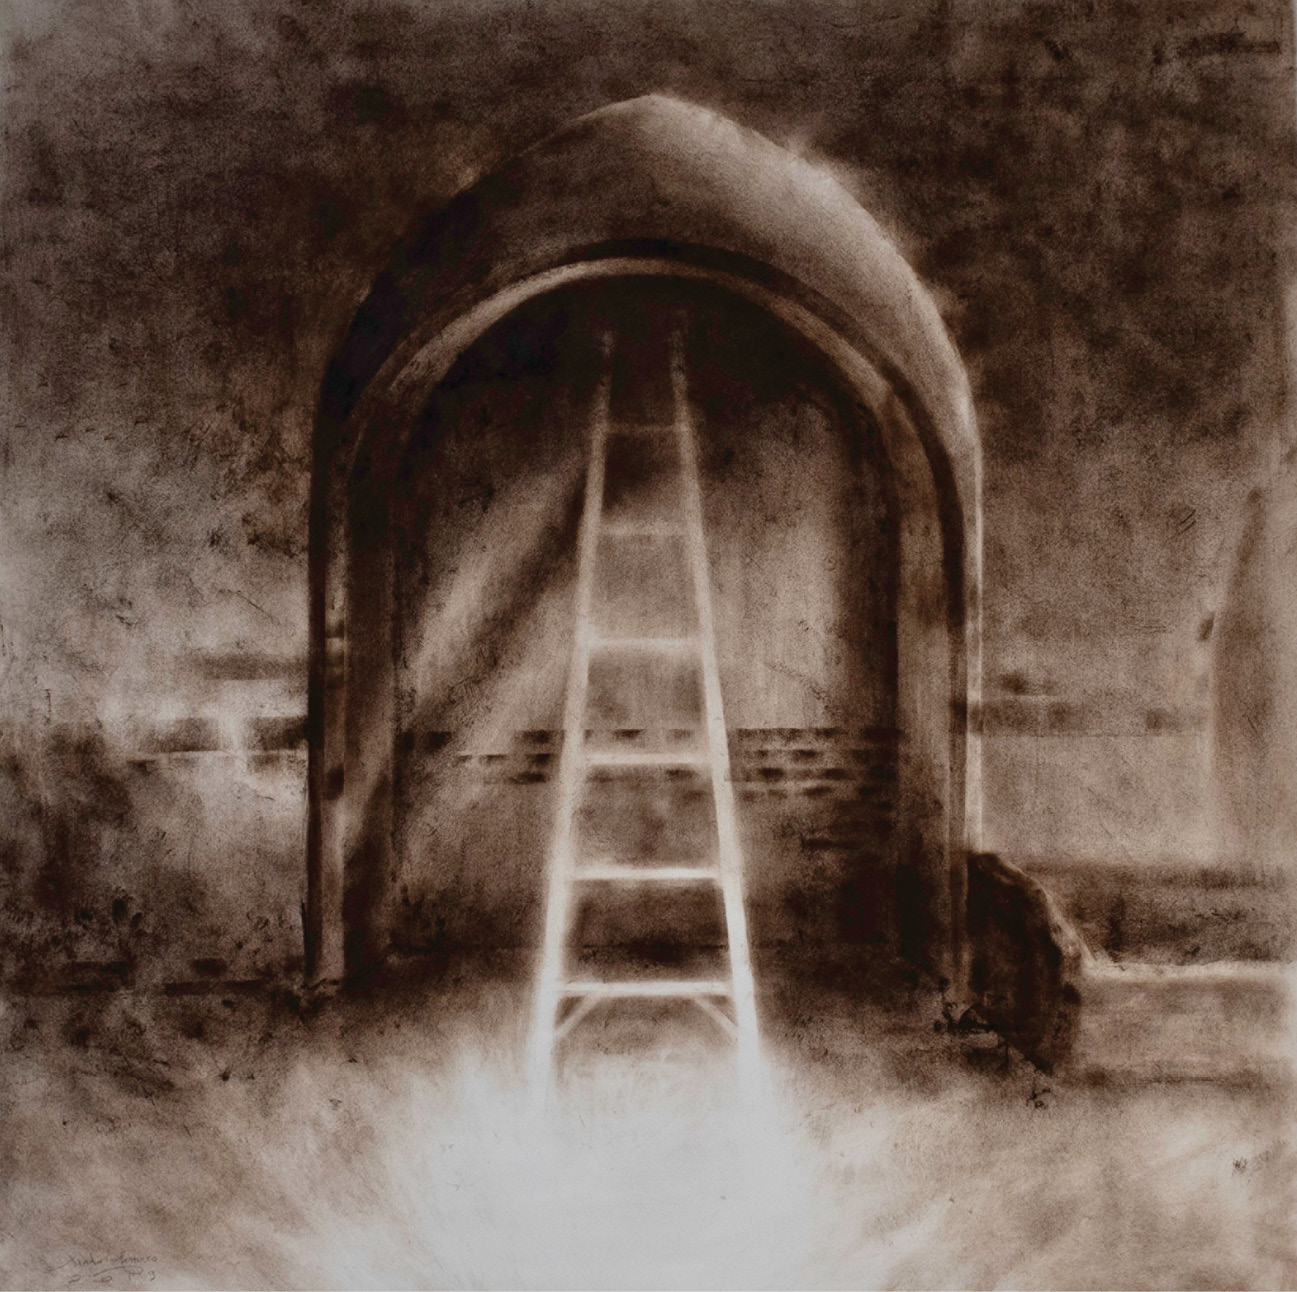 Bold Brush: Confined Ladder (oil on paper, 50 x 50 inches, 2019) demonstrates Fantuzzo’s breadth of technique, here using dry brush to explore an ephemeral interplay between passages and confinement.